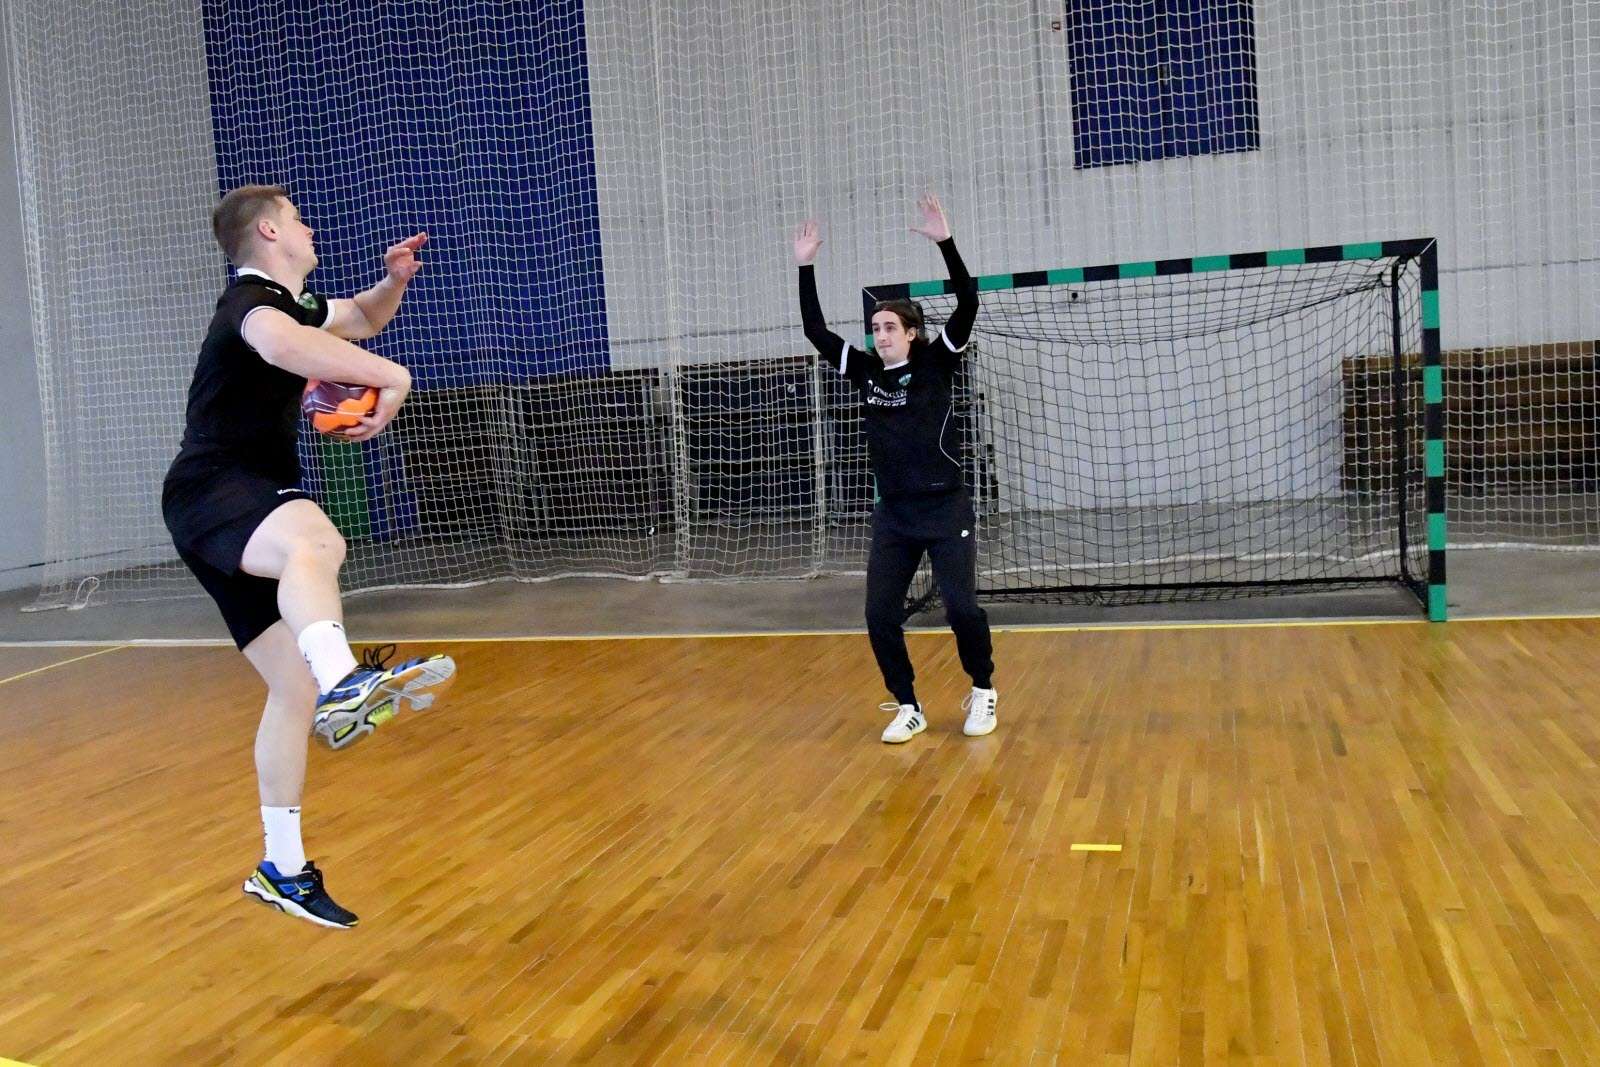 Master the art of handball roucoulette: Essential techniques and tips